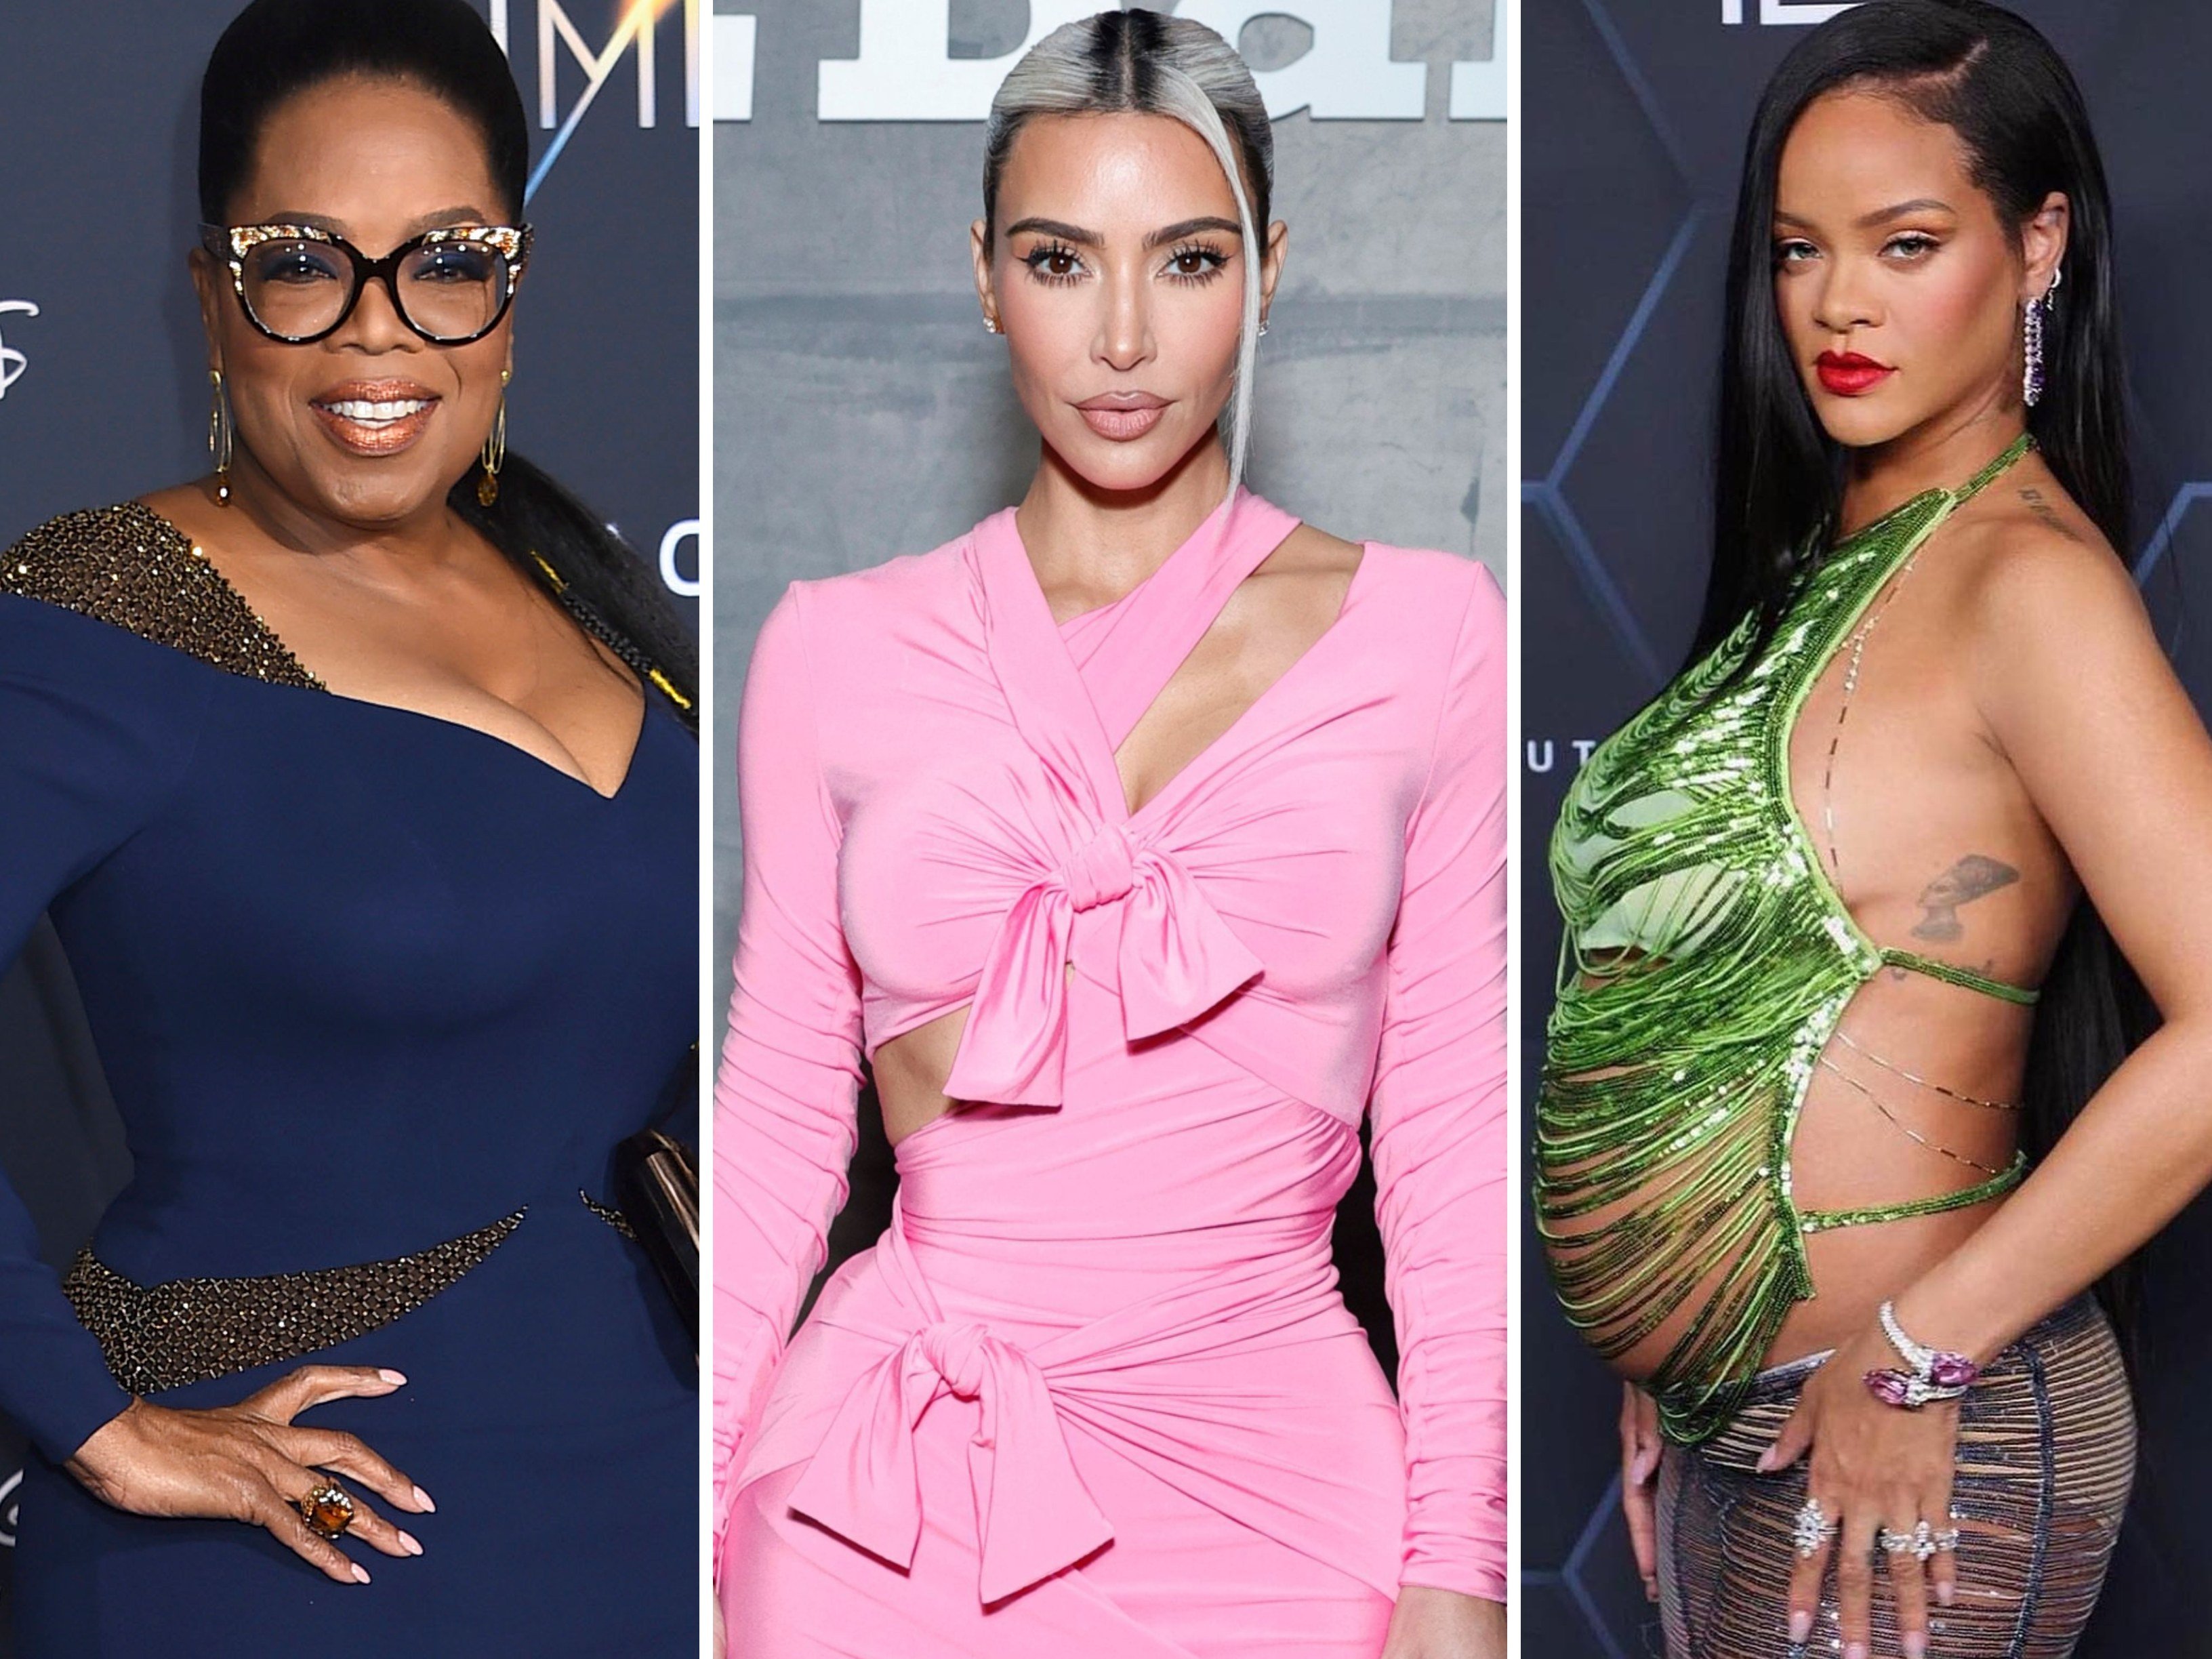 Oprah Winfrey, Kim Kardashian and Rihanna are some of the richest female celebrities who are self-made billionaires. Photos: Getty Images, AP, @fentybeauty/Instagram 